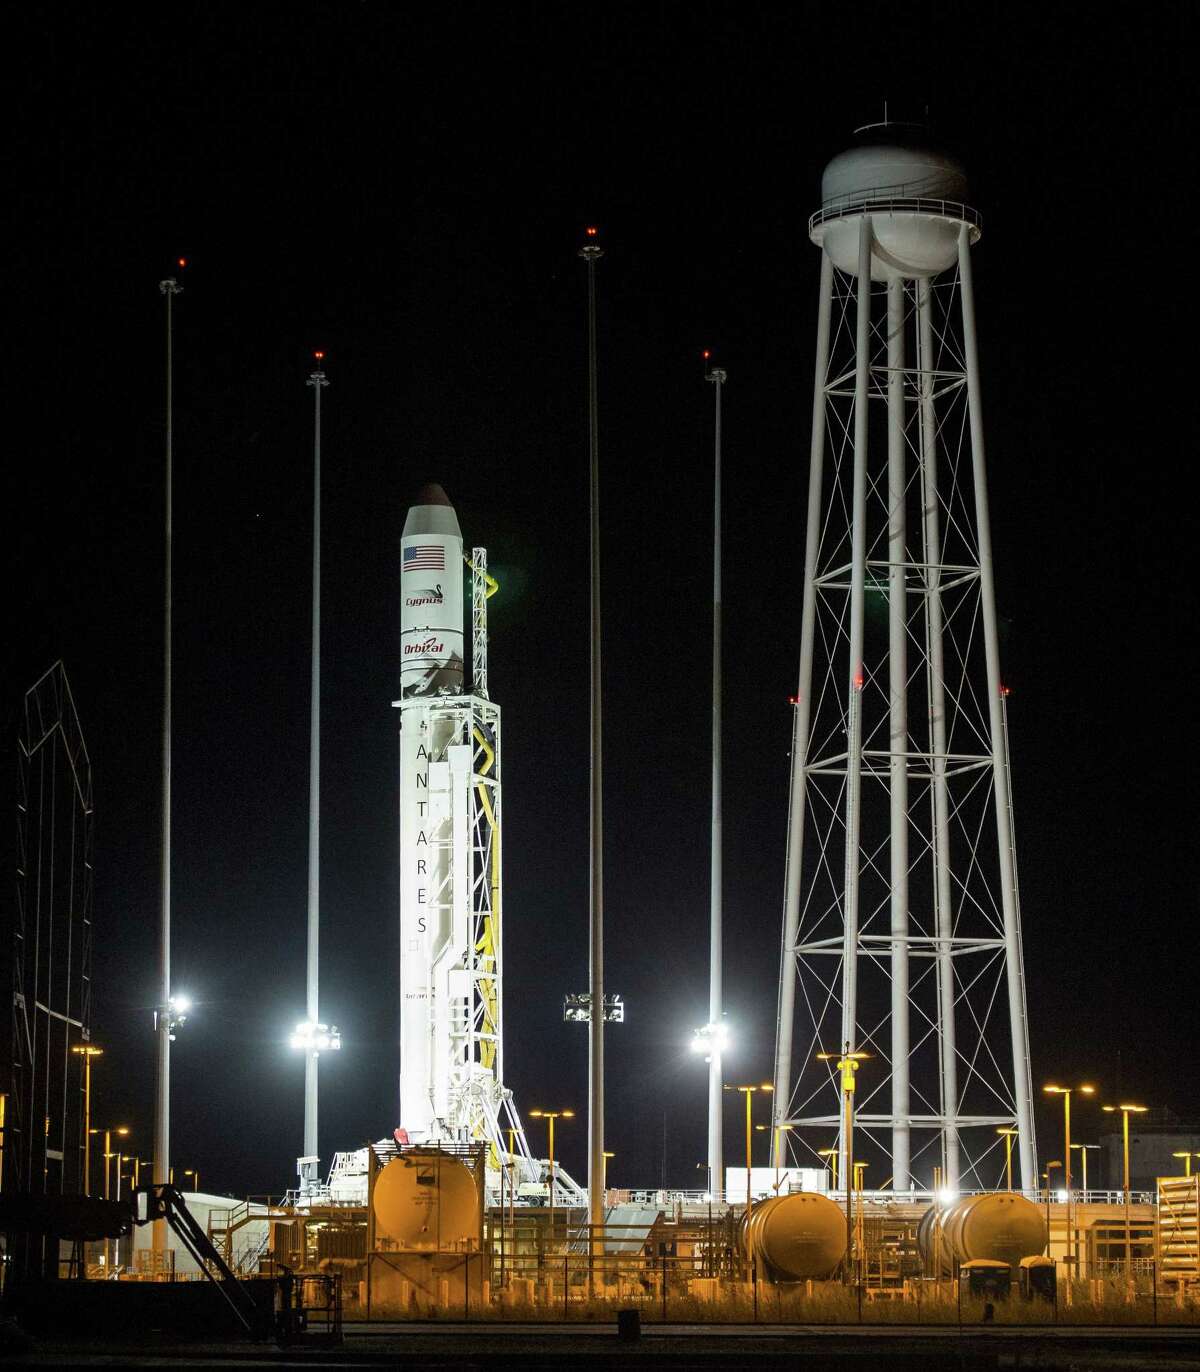 The Orbital Sciences Corporation Antares rocket, with the Cygnus spacecraft onboard, is seen after being raised into vertical position on launch Pad-0A, Oct. 25, 2014, at NASA’s Wallops Flight Facility in Virginia.